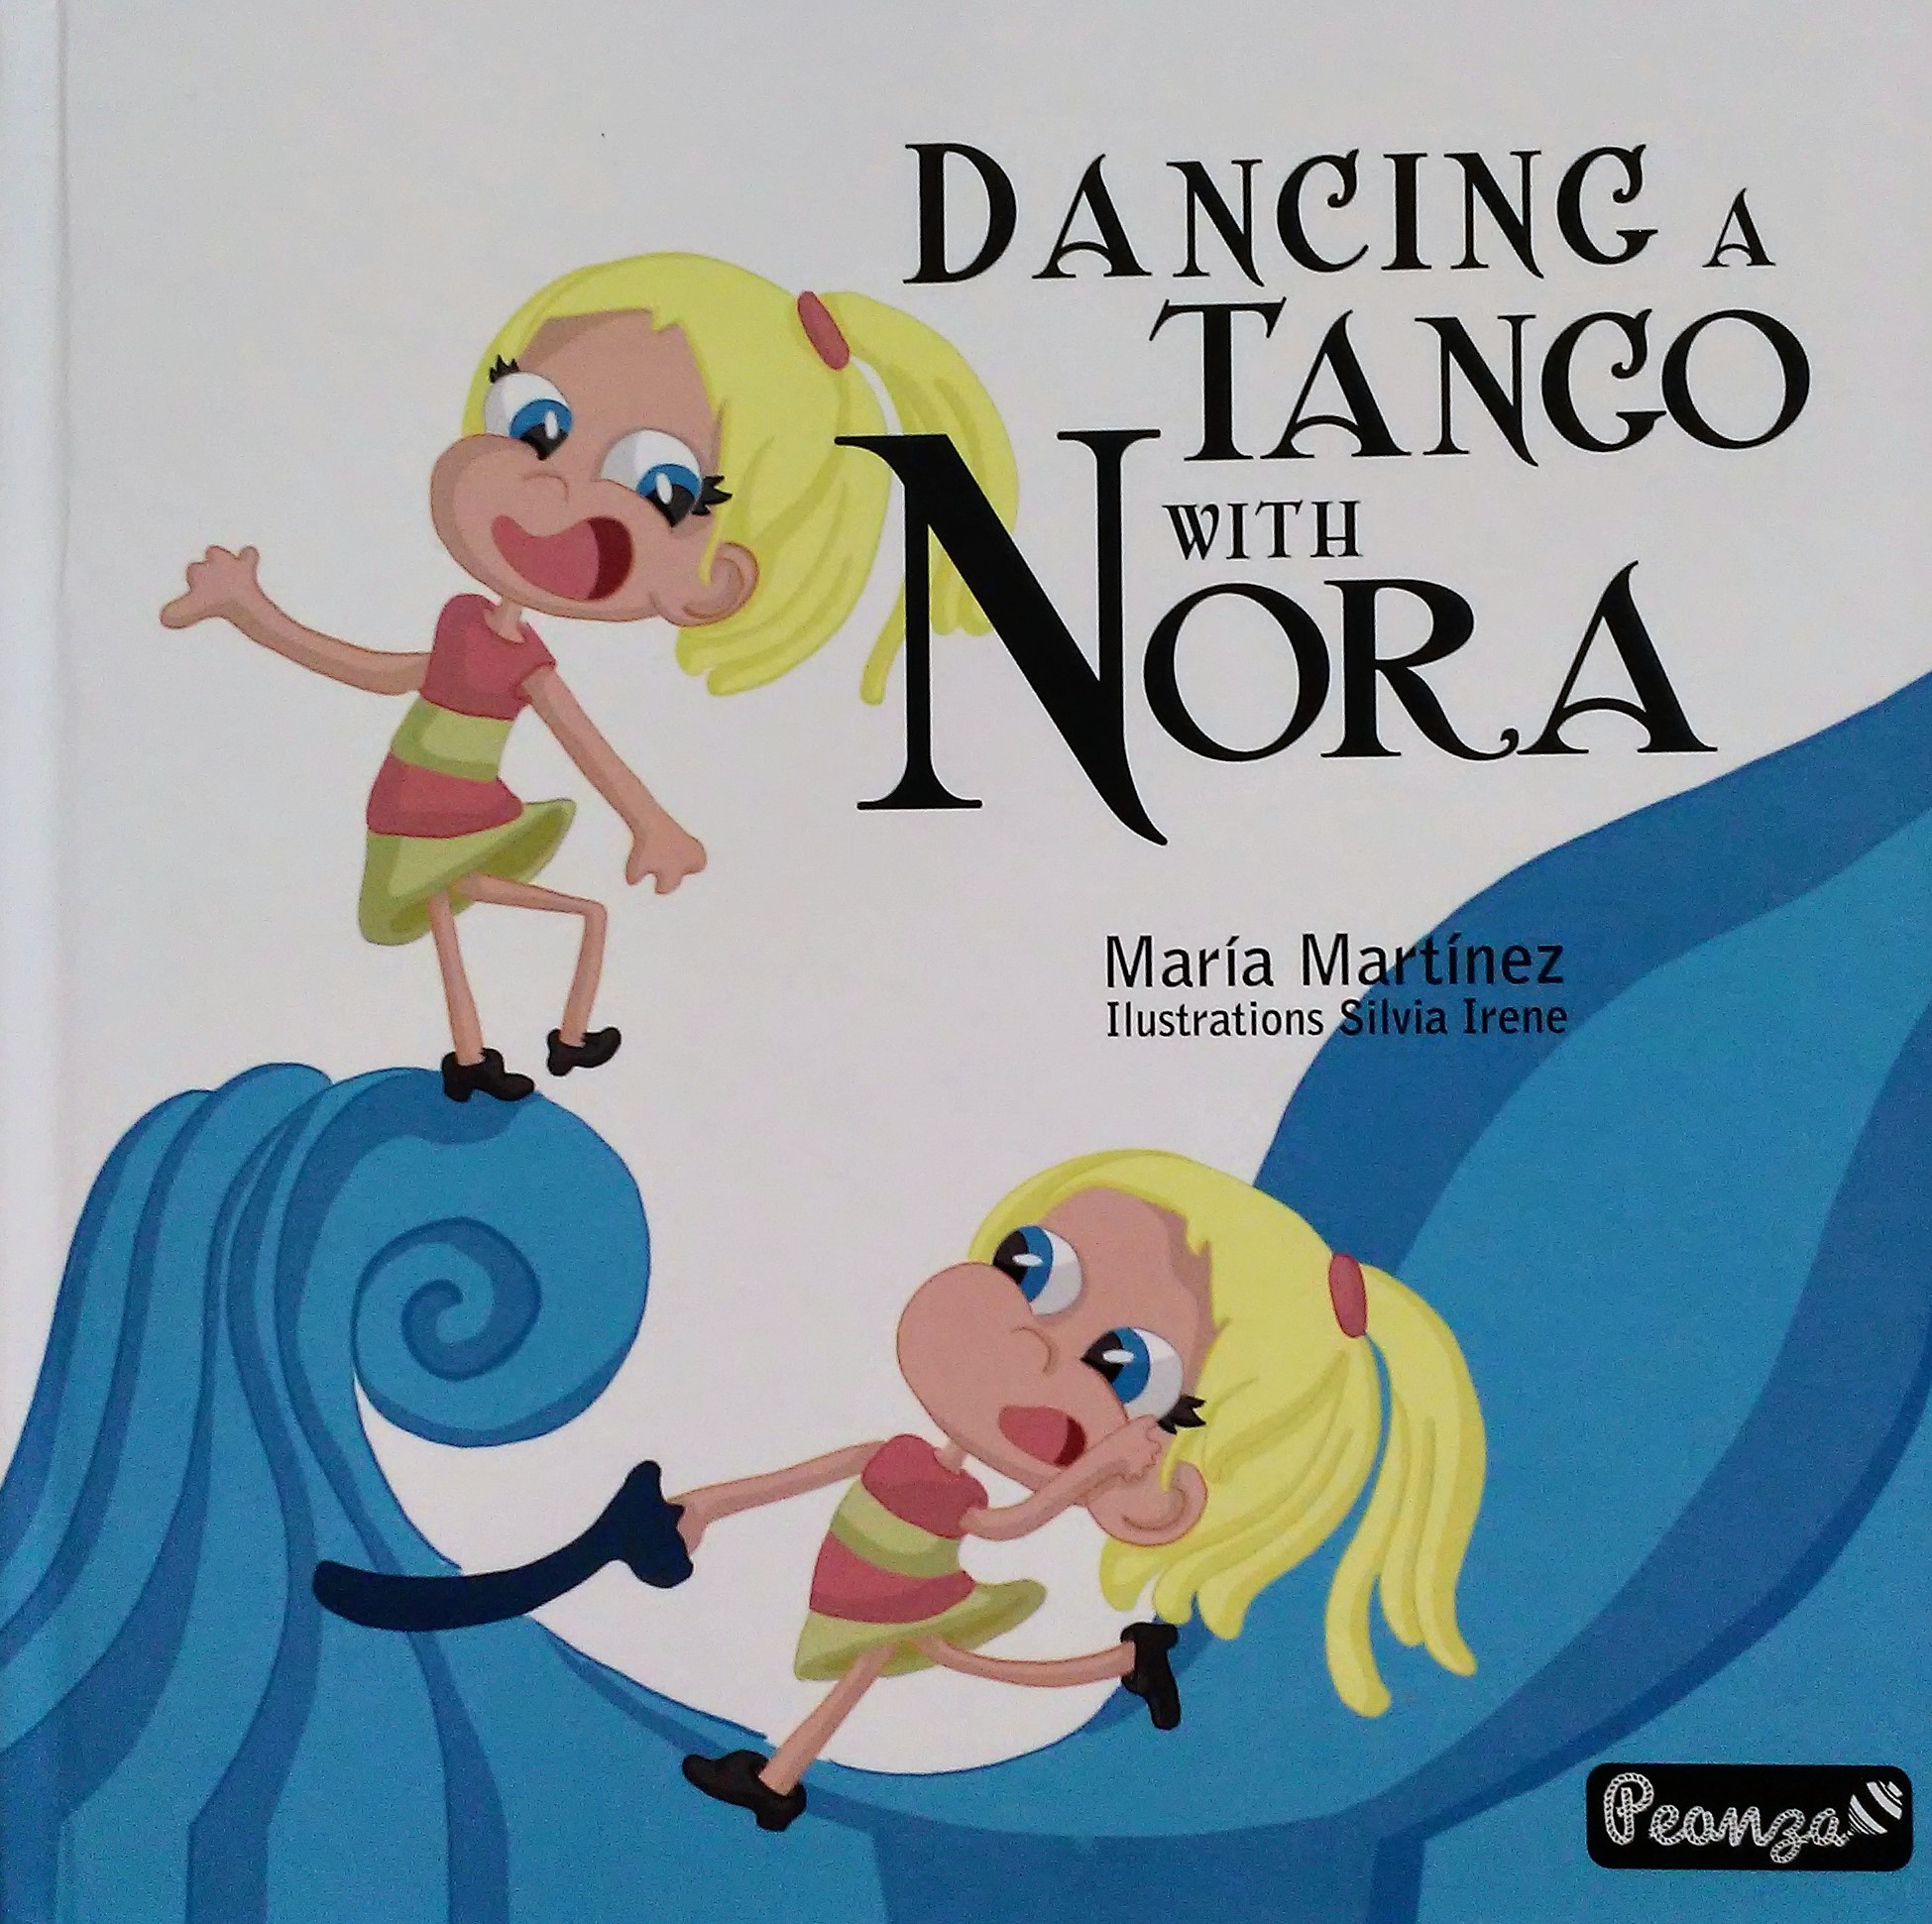 DANCING A TANGO WITH NORA